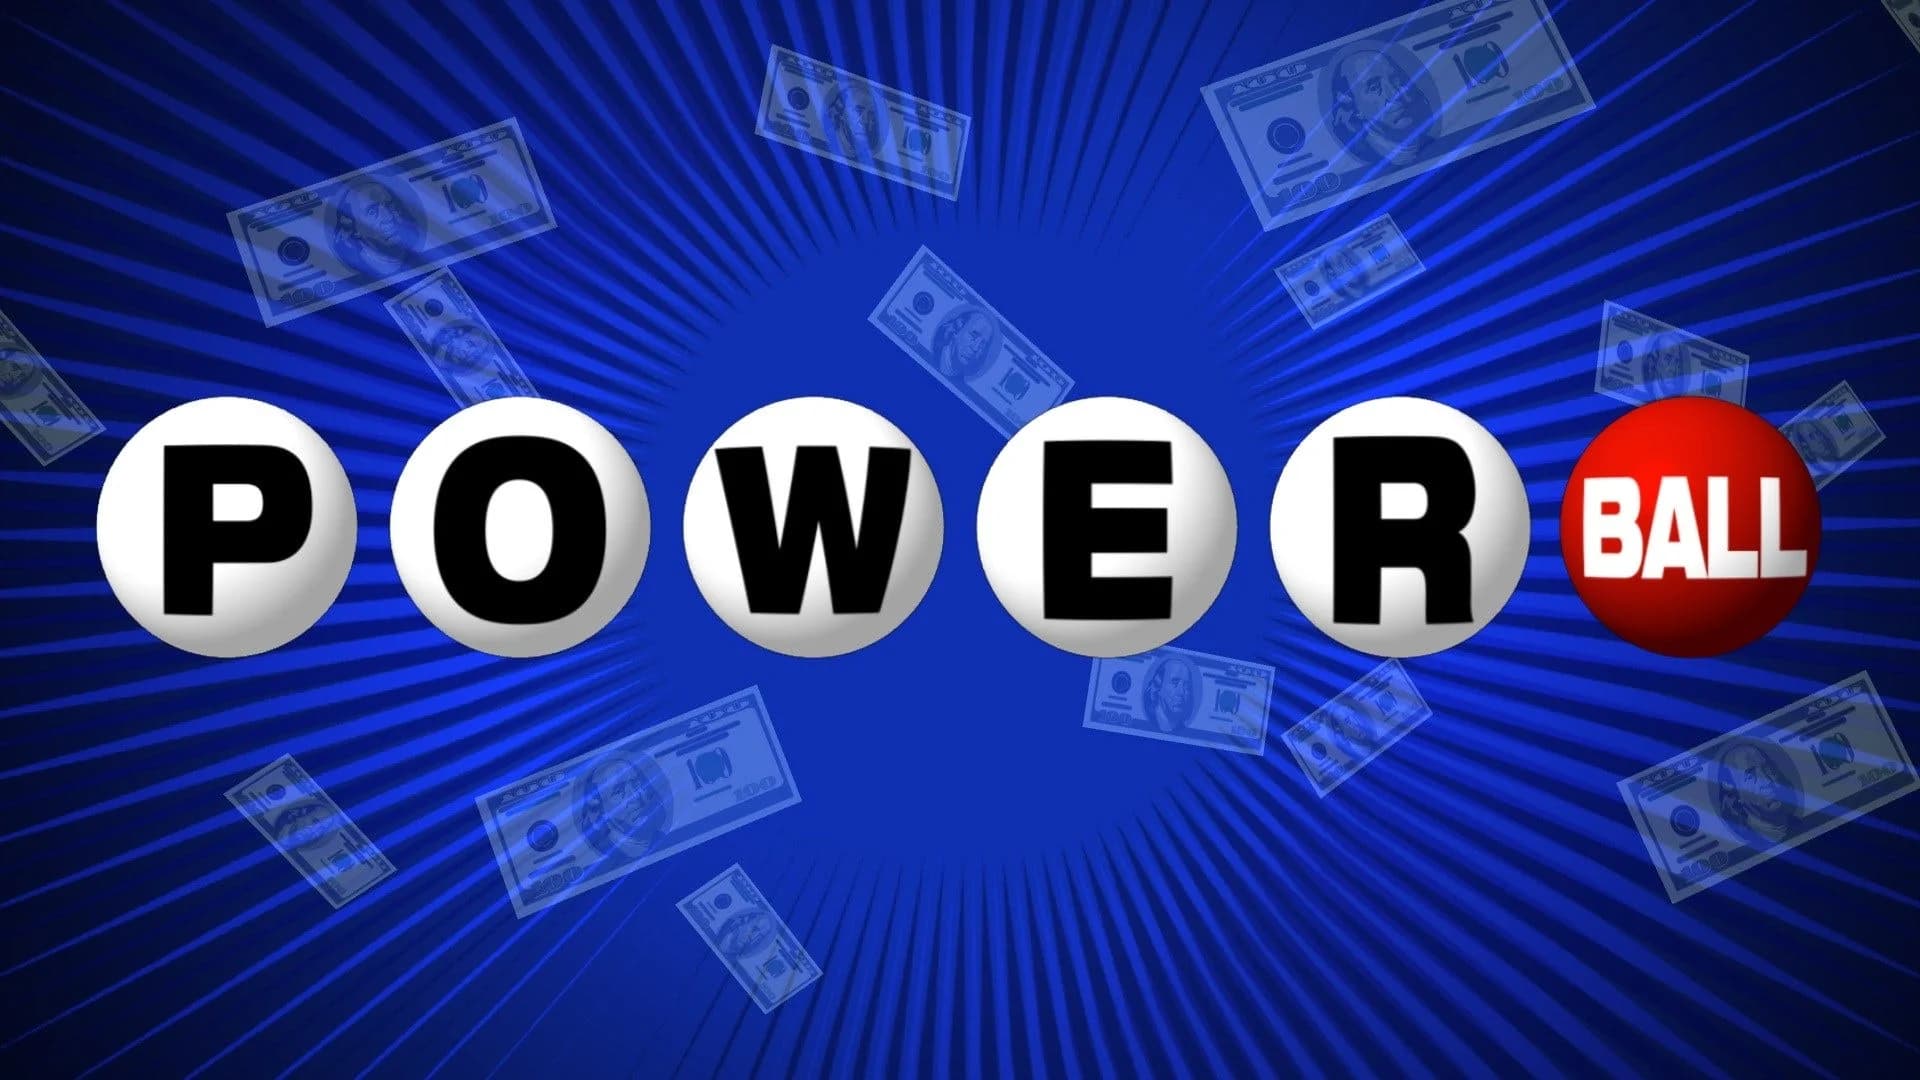 Check your tickets! – $1 million Powerball lottery ticket sold in New Jersey